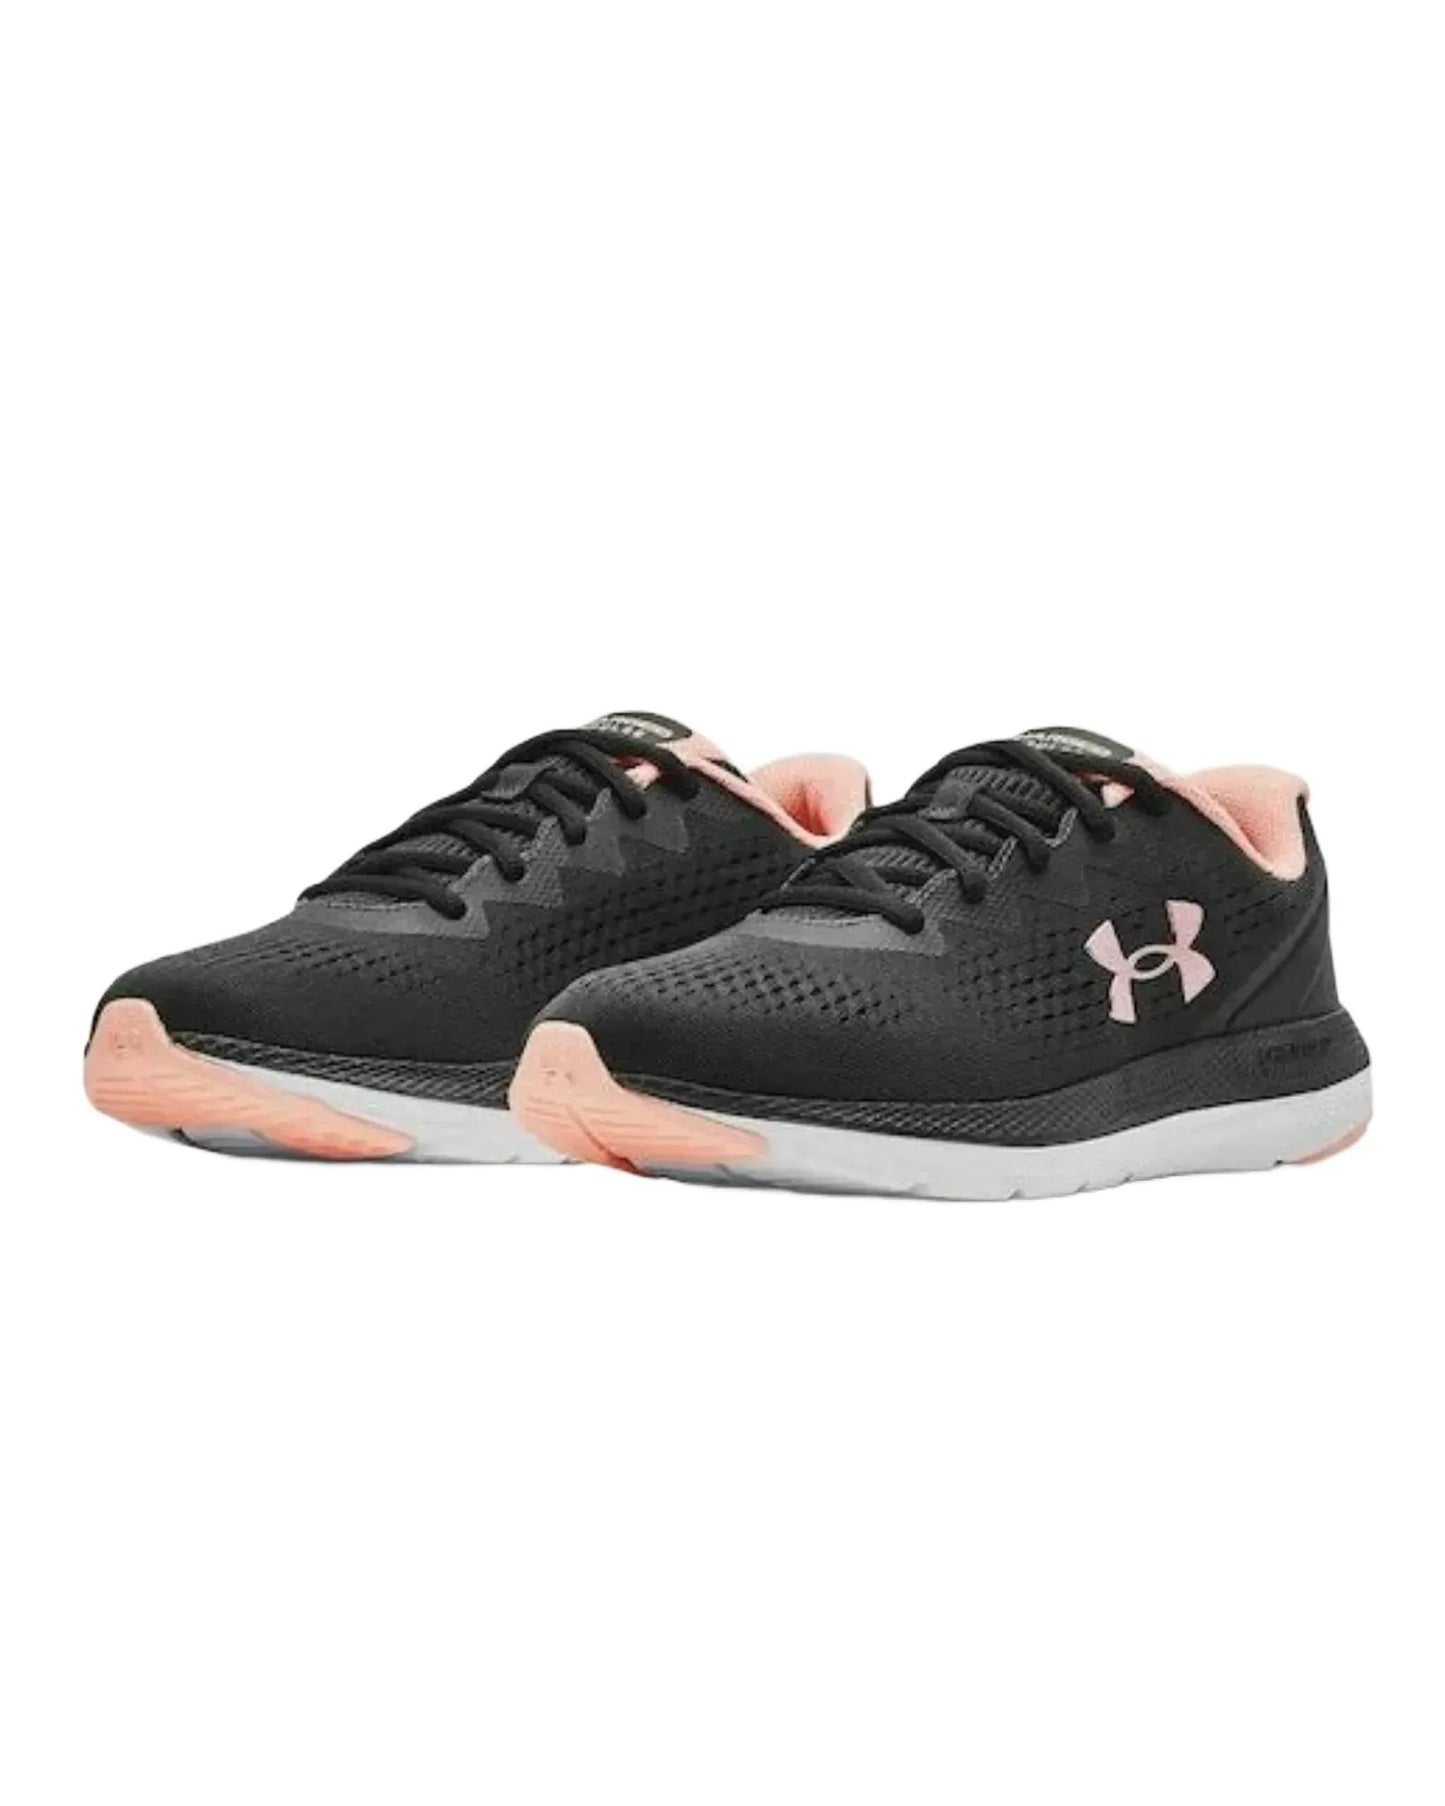 Chaussures de course Charged Impulse 2 - Under Armour